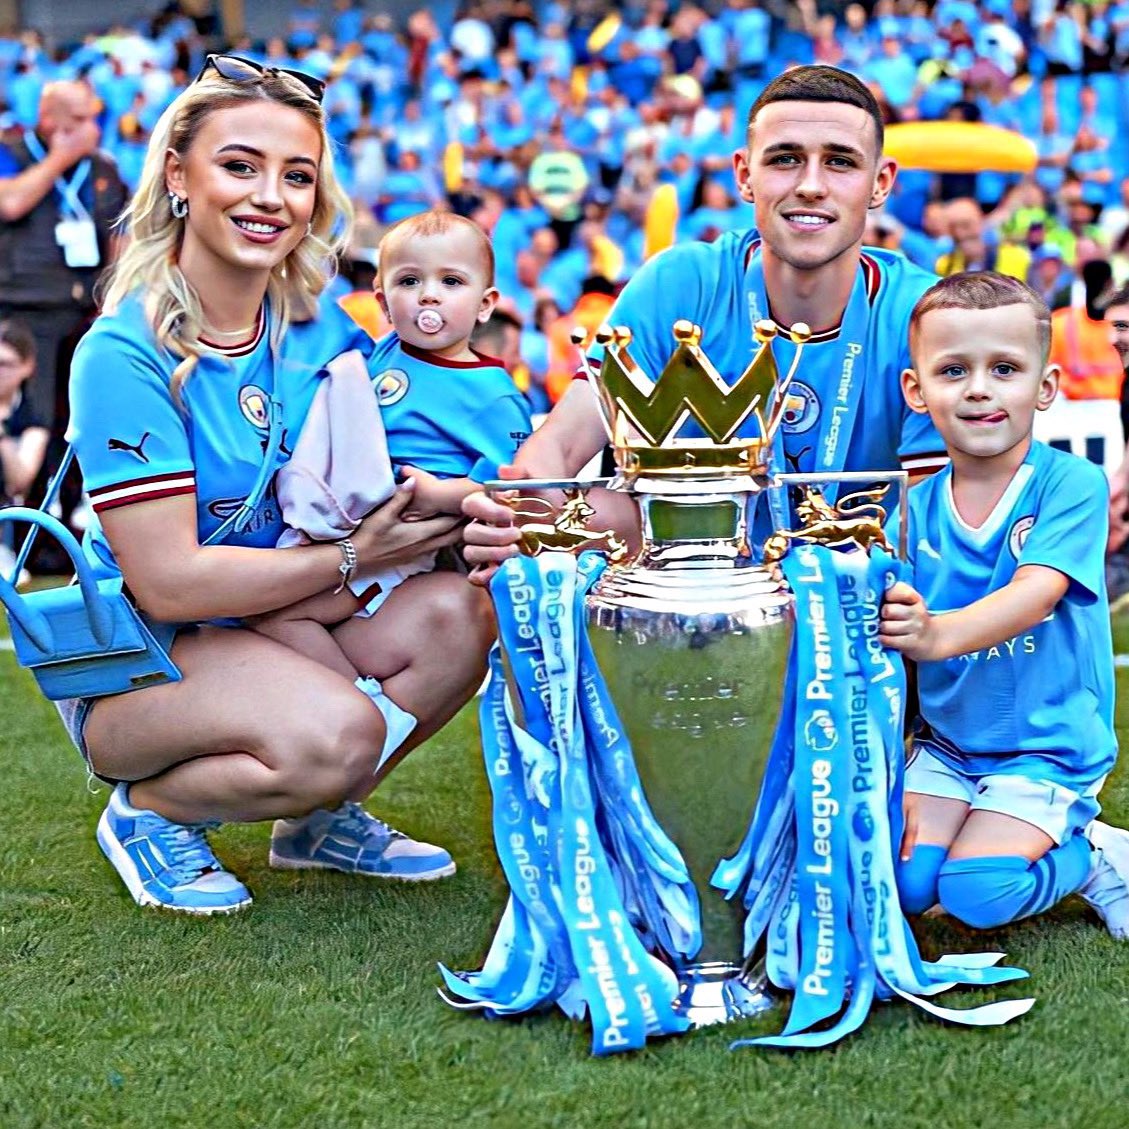 Phil Foden at age 22 already has 2 children. 

Where did we go wrong in Africa?😔😭